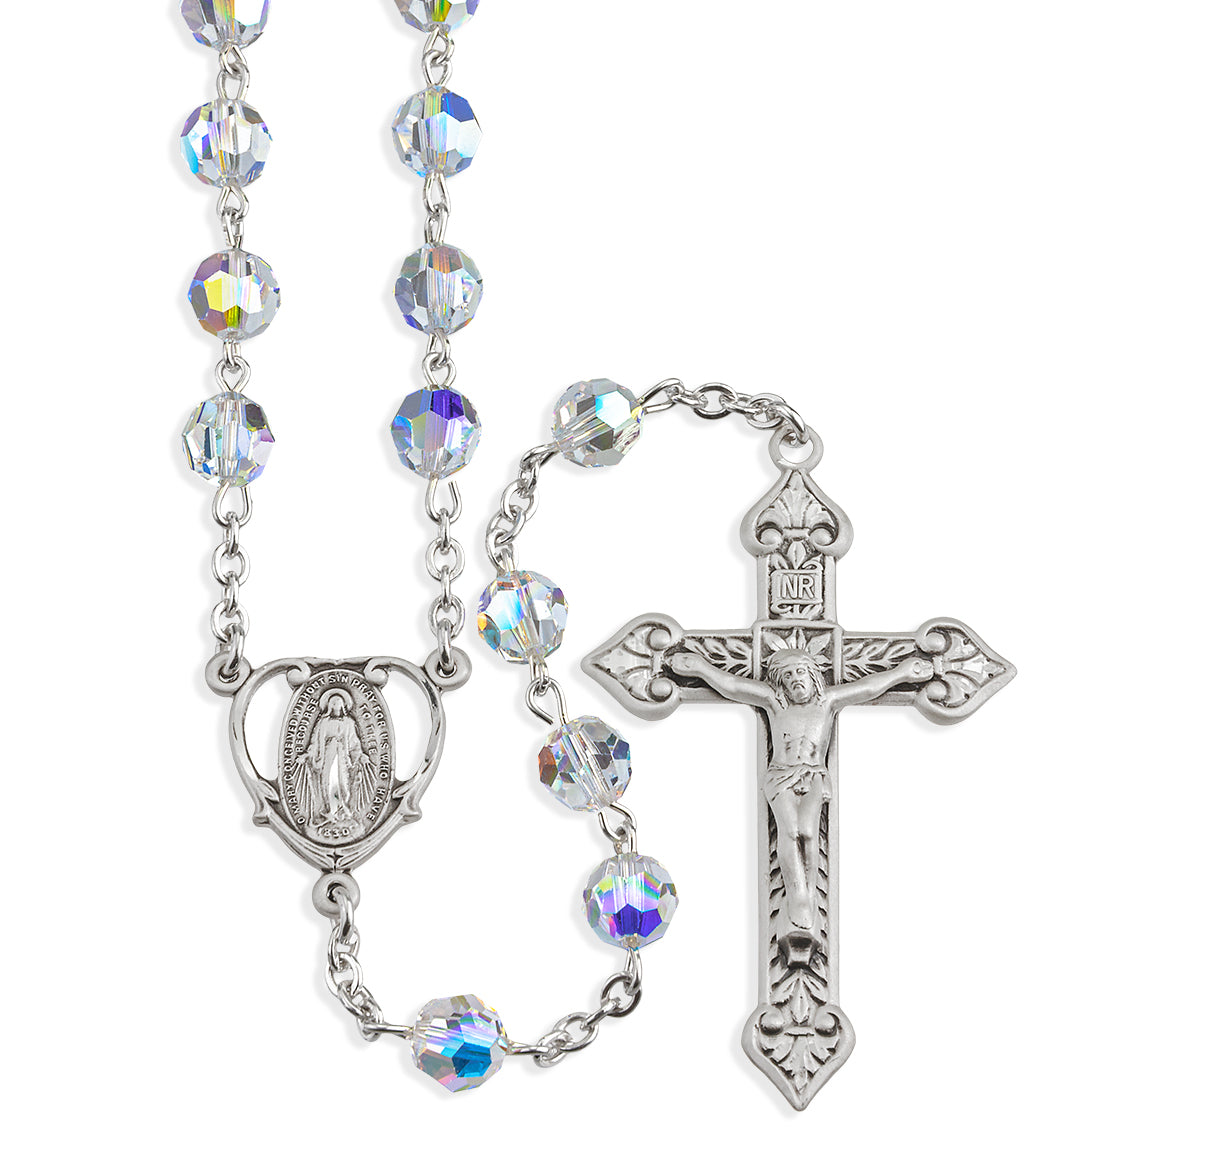 Sterling Silver Rosary Hand Made with Swarovski Crystal 7mm Aurora Borealis Faceted Beads by HMH